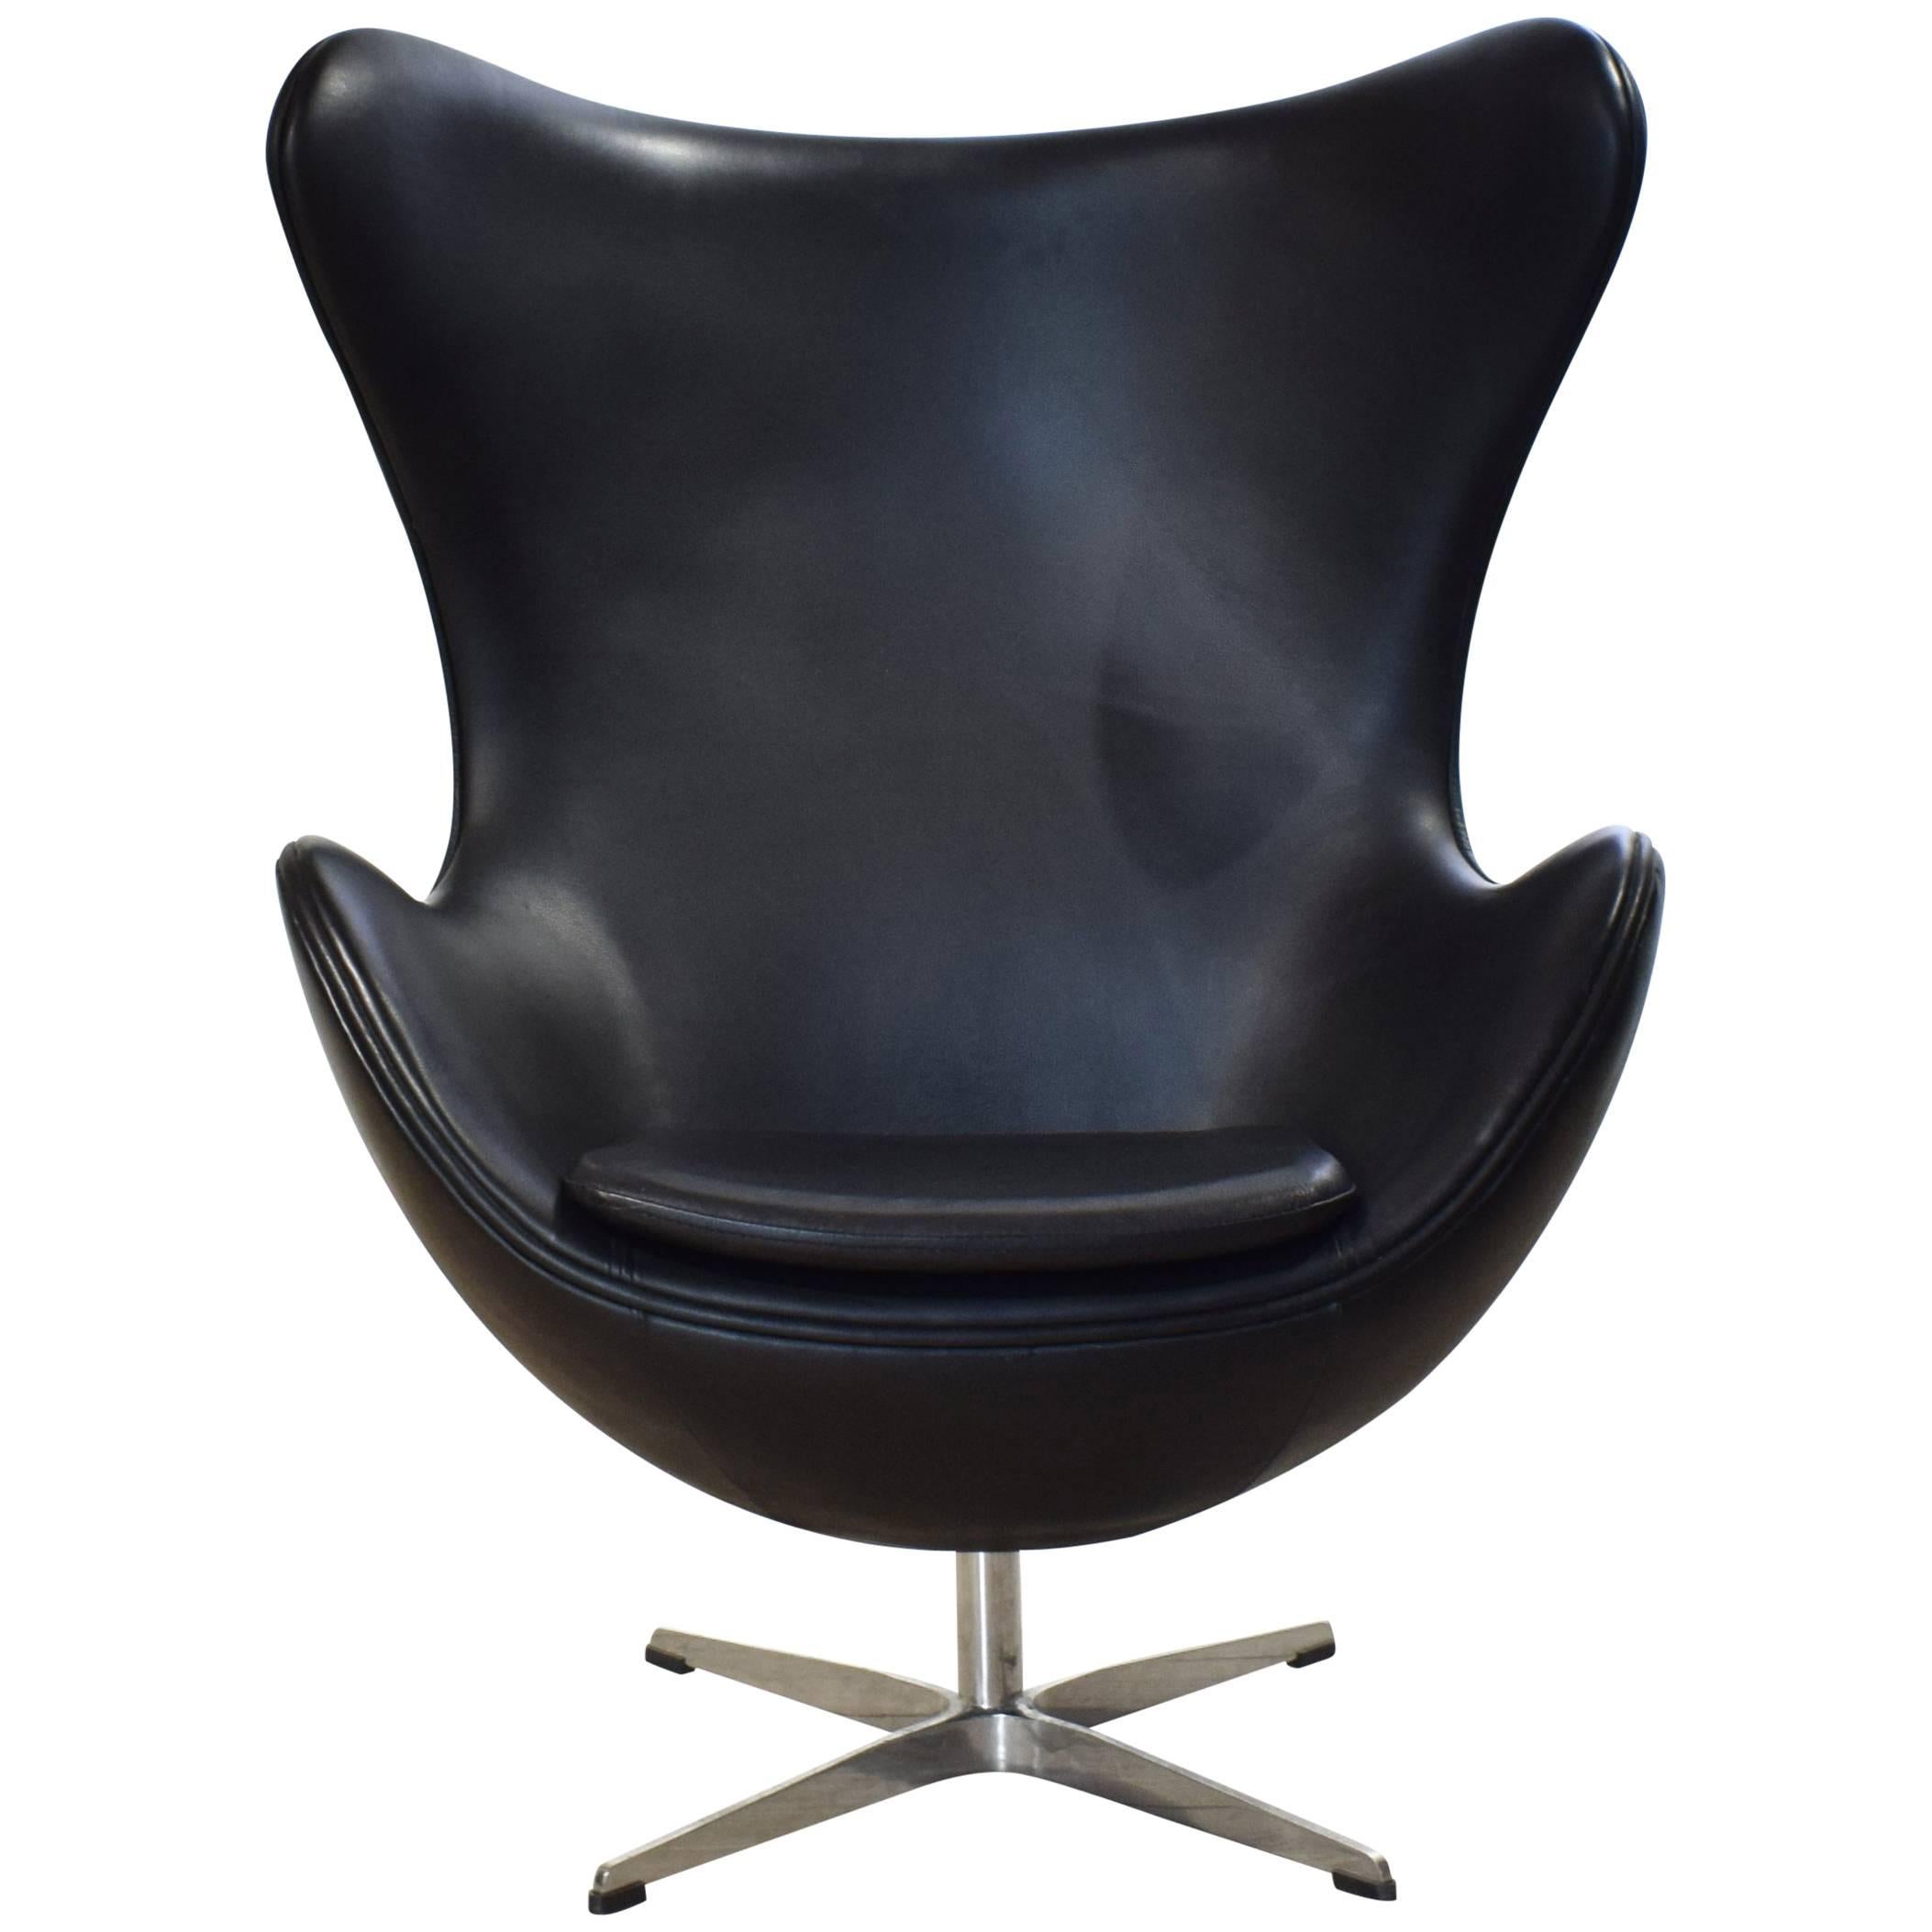 Midcentury Black Leather Egg Chair in the Style of Arne Jacobsen